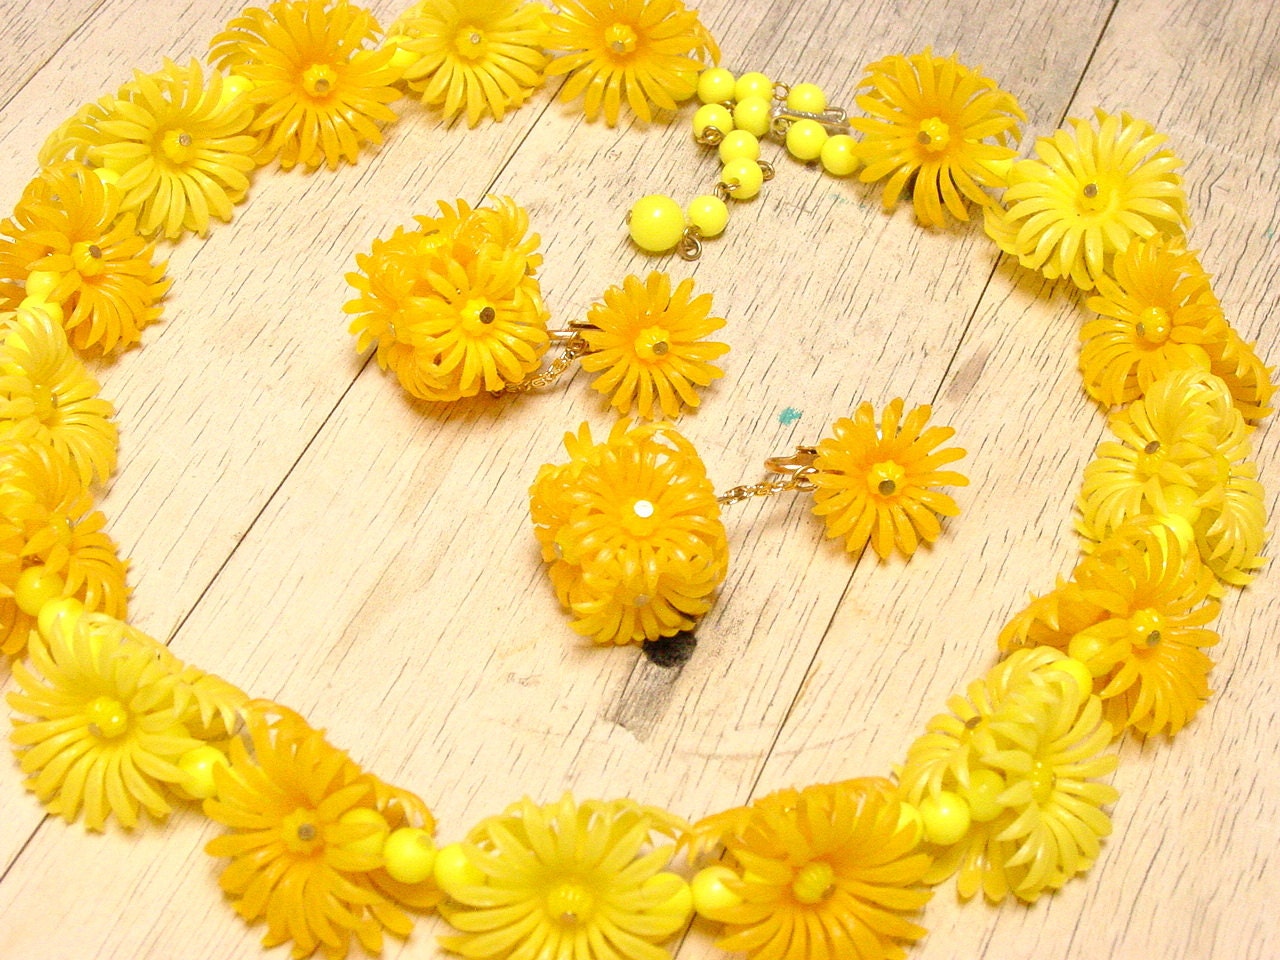 Hong Kong Soft Plastic Yellow Flower Earring and Necklace Set (vintage retro 50s 60s floral bright daisy wedding bridal summer clip choker) - SomeLittleStars